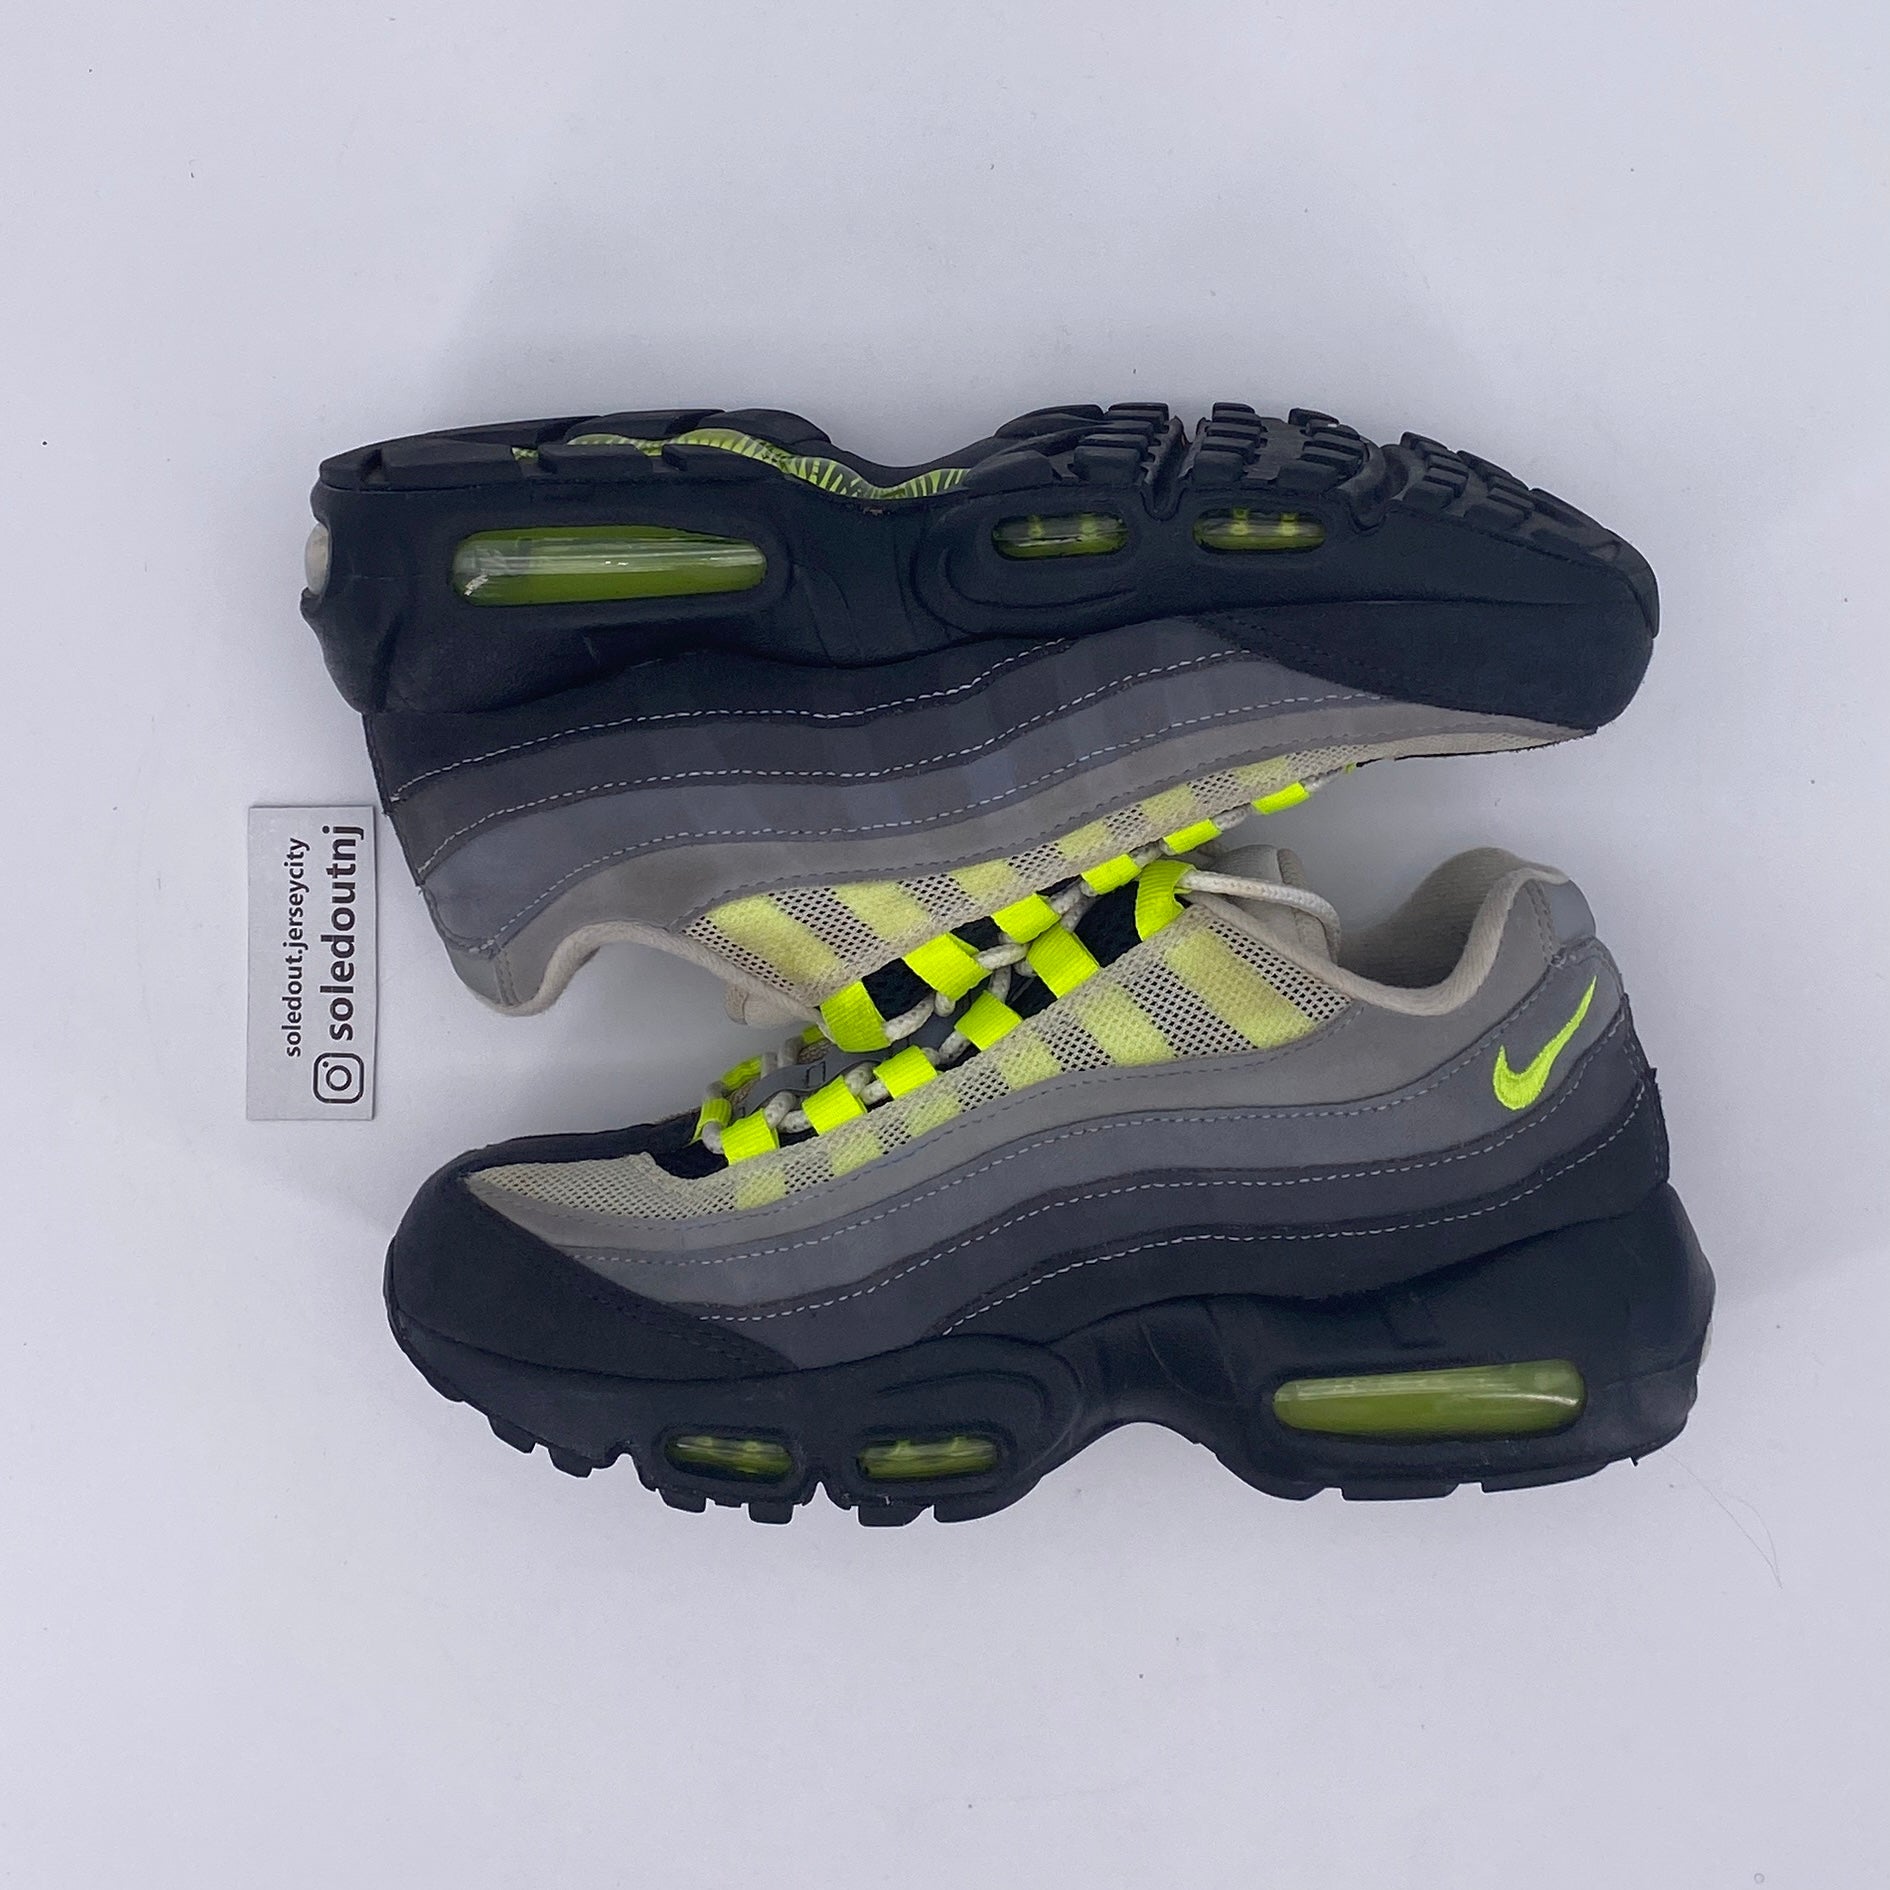 Nike (GS) Air Max 95 "Neon" 2020 Used Size 6.5Y